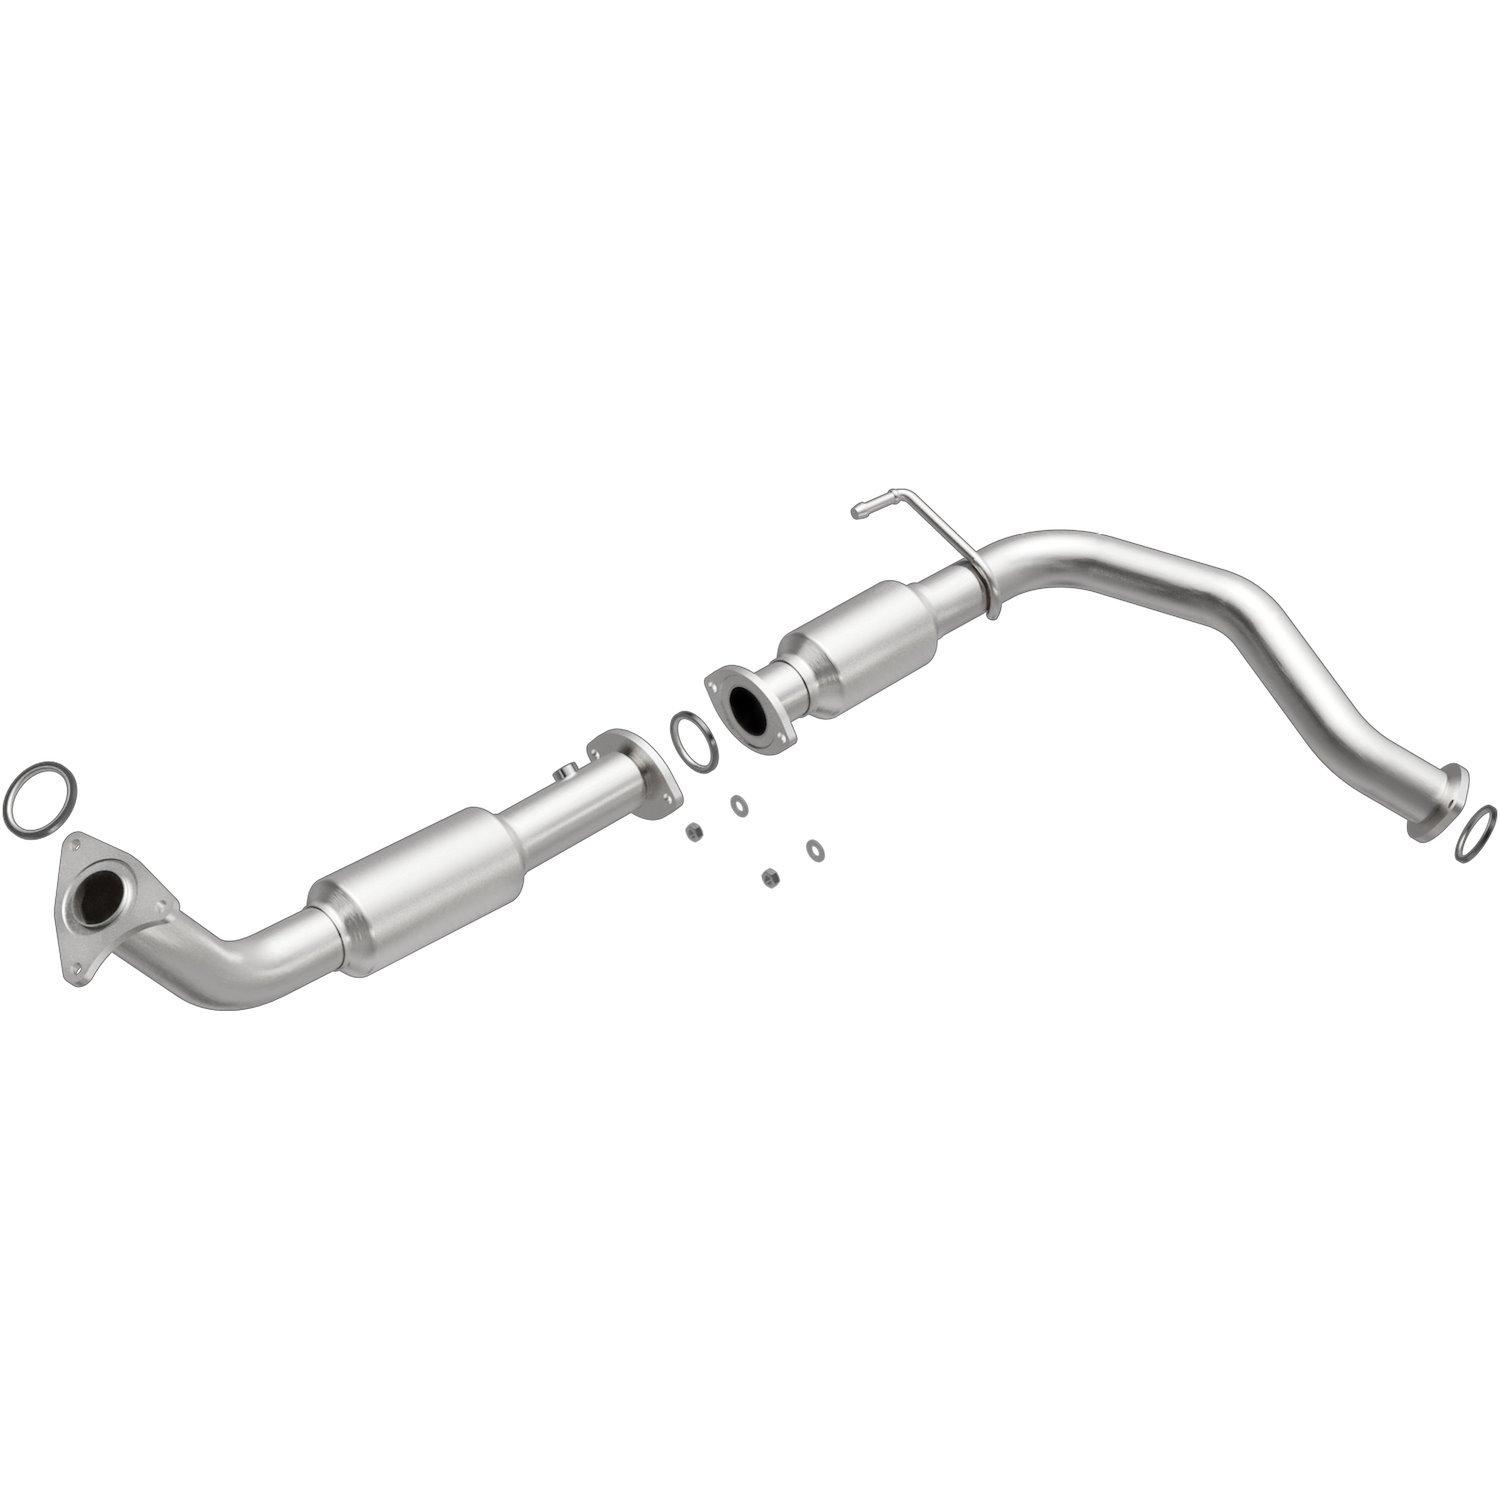 2008-2018 Toyota Sequoia OEM Grade Federal / EPA Compliant Direct-Fit Catalytic Converter